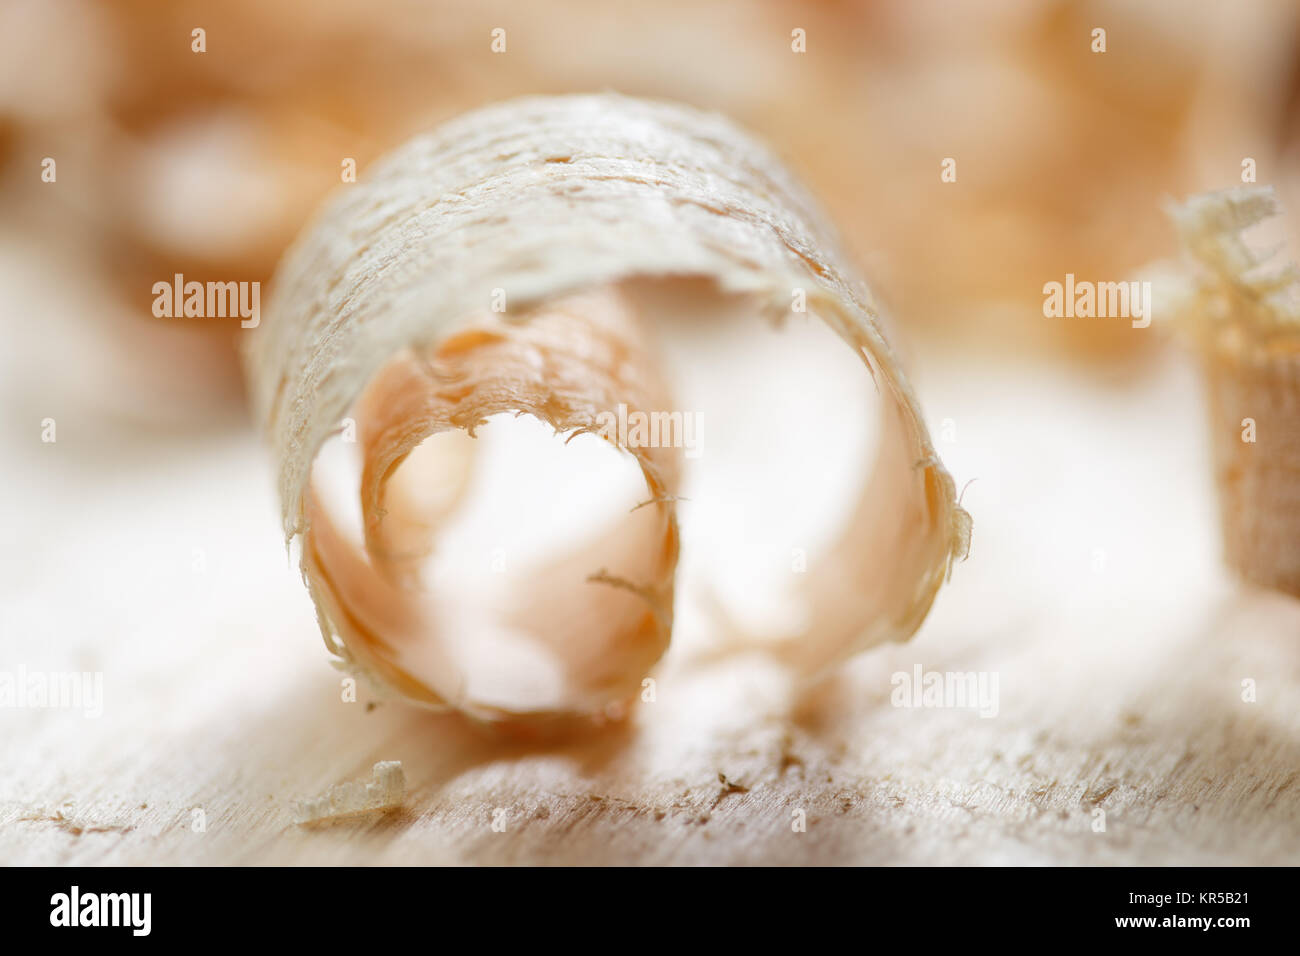 Wood shavings with shallow depth of field. Stock Photo